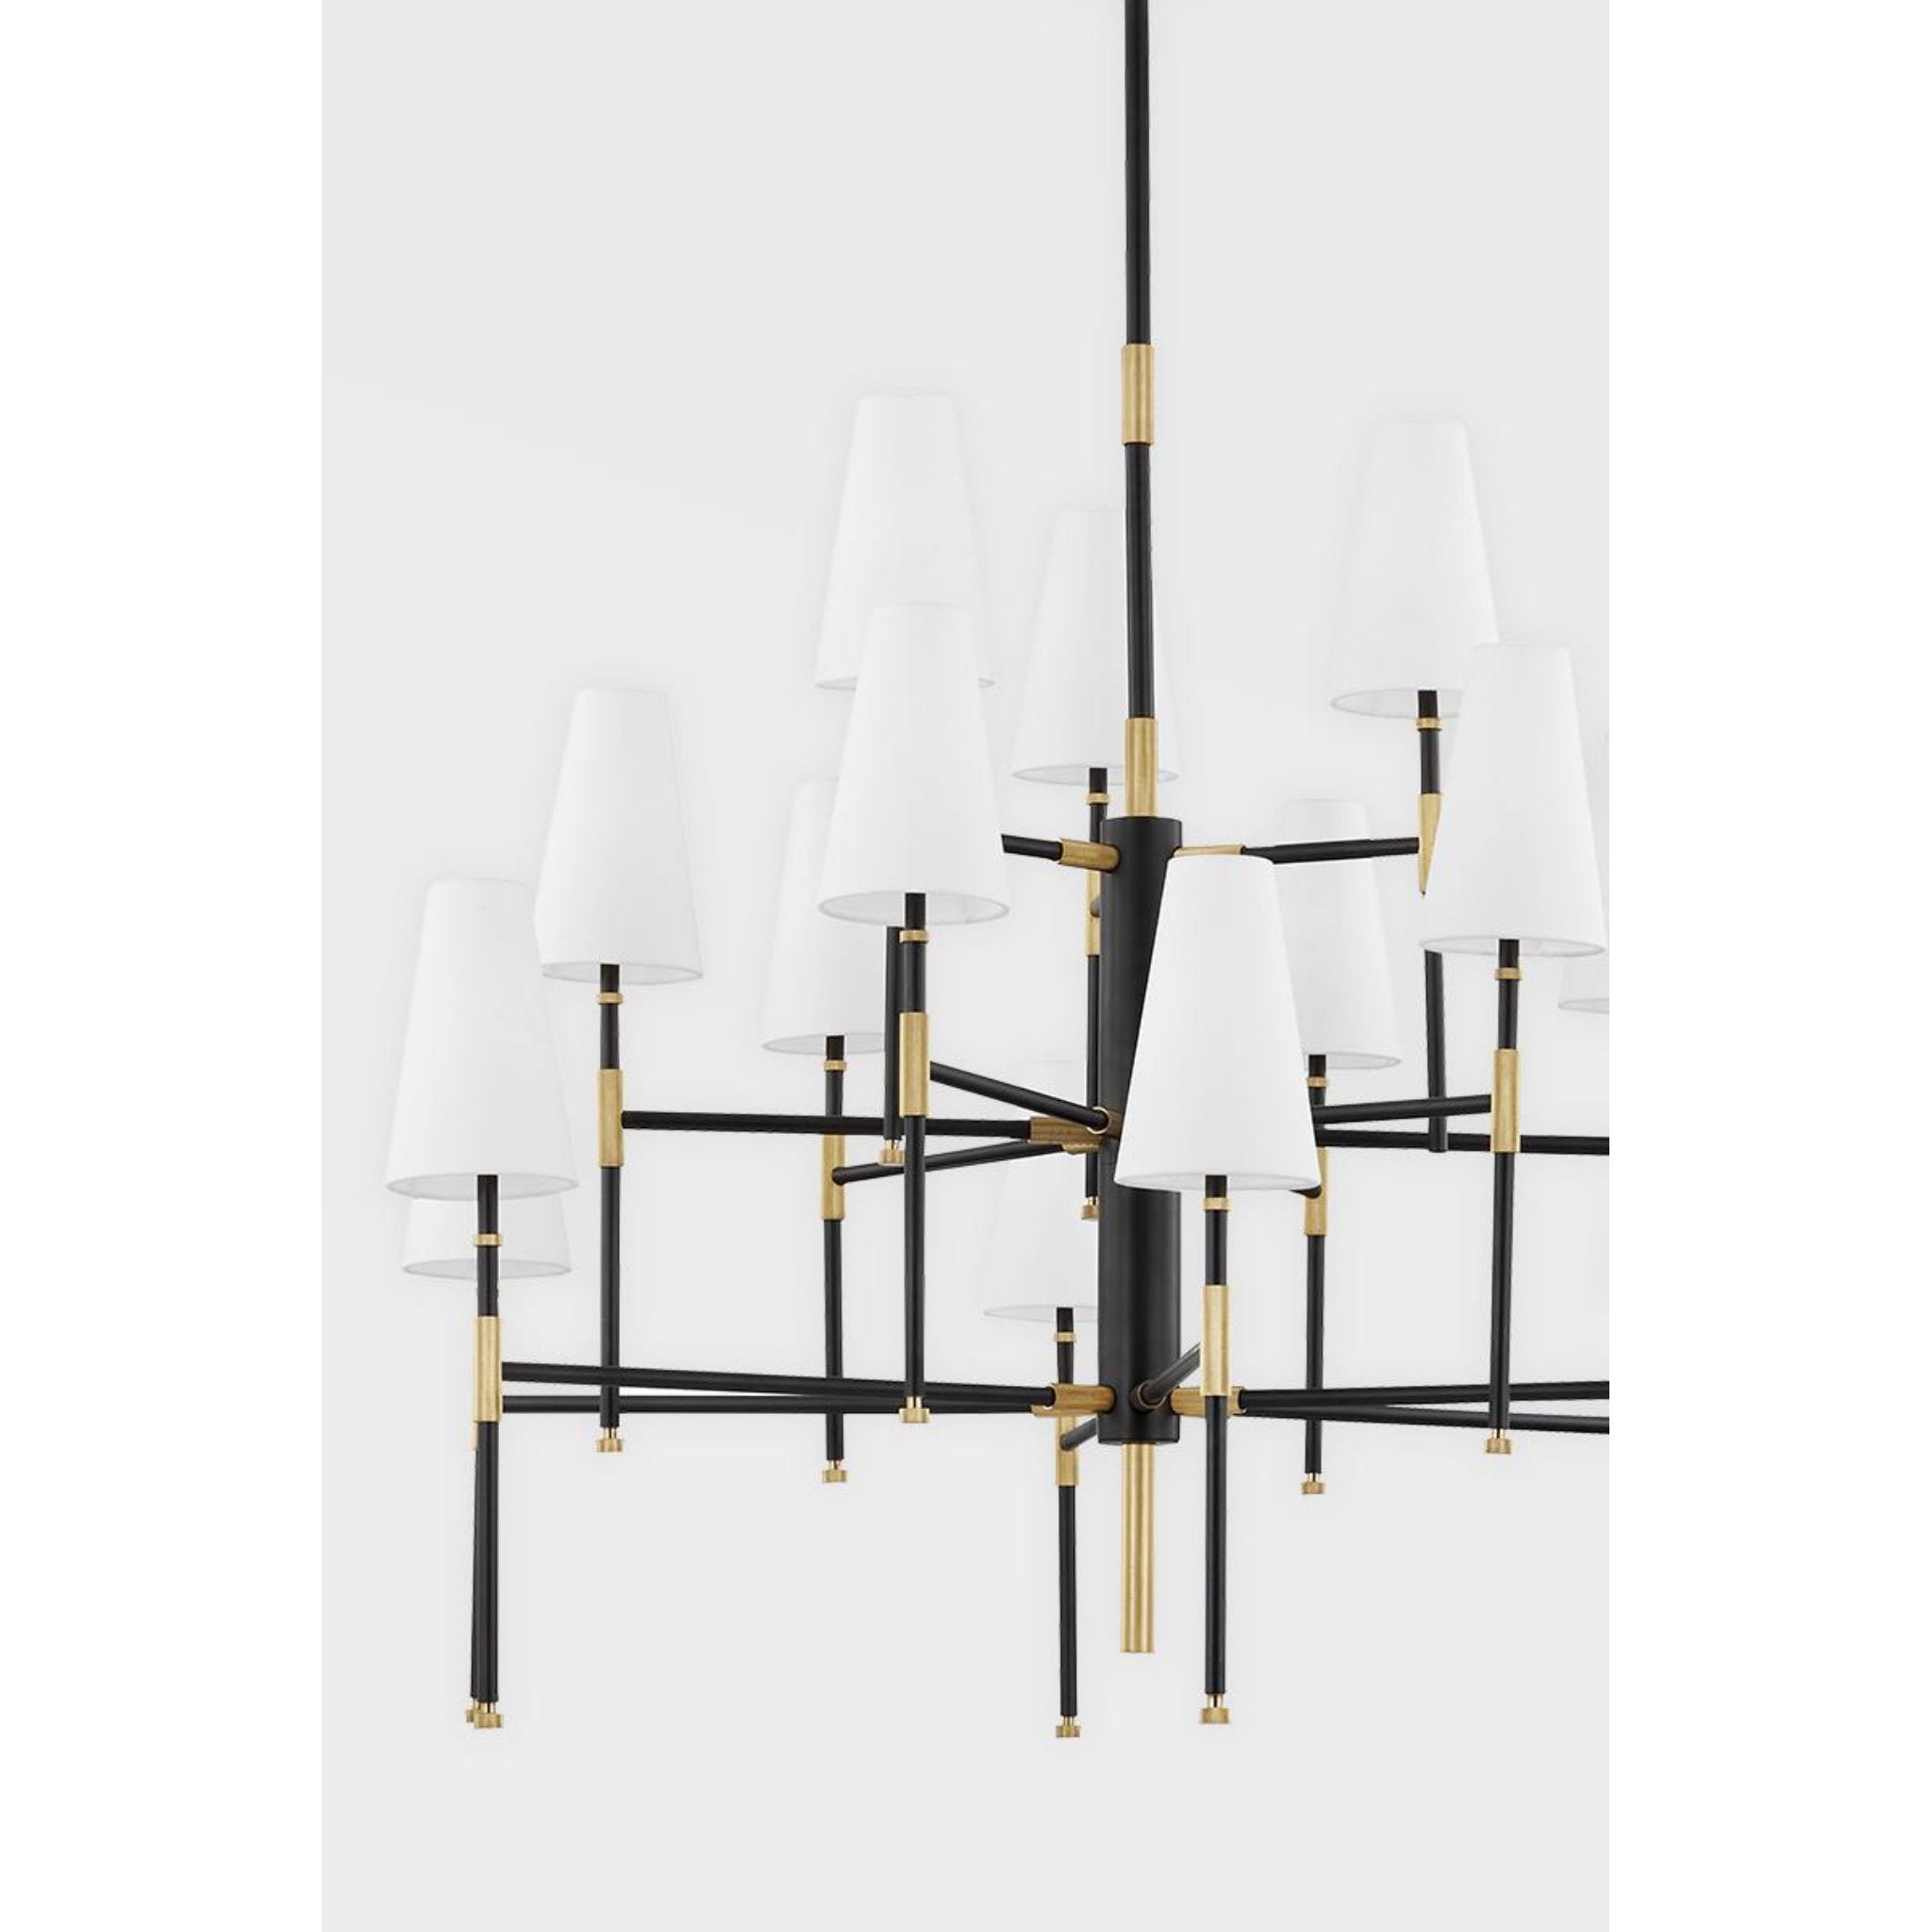 Bowery 15 Light Chandelier in Aged Old Bronze